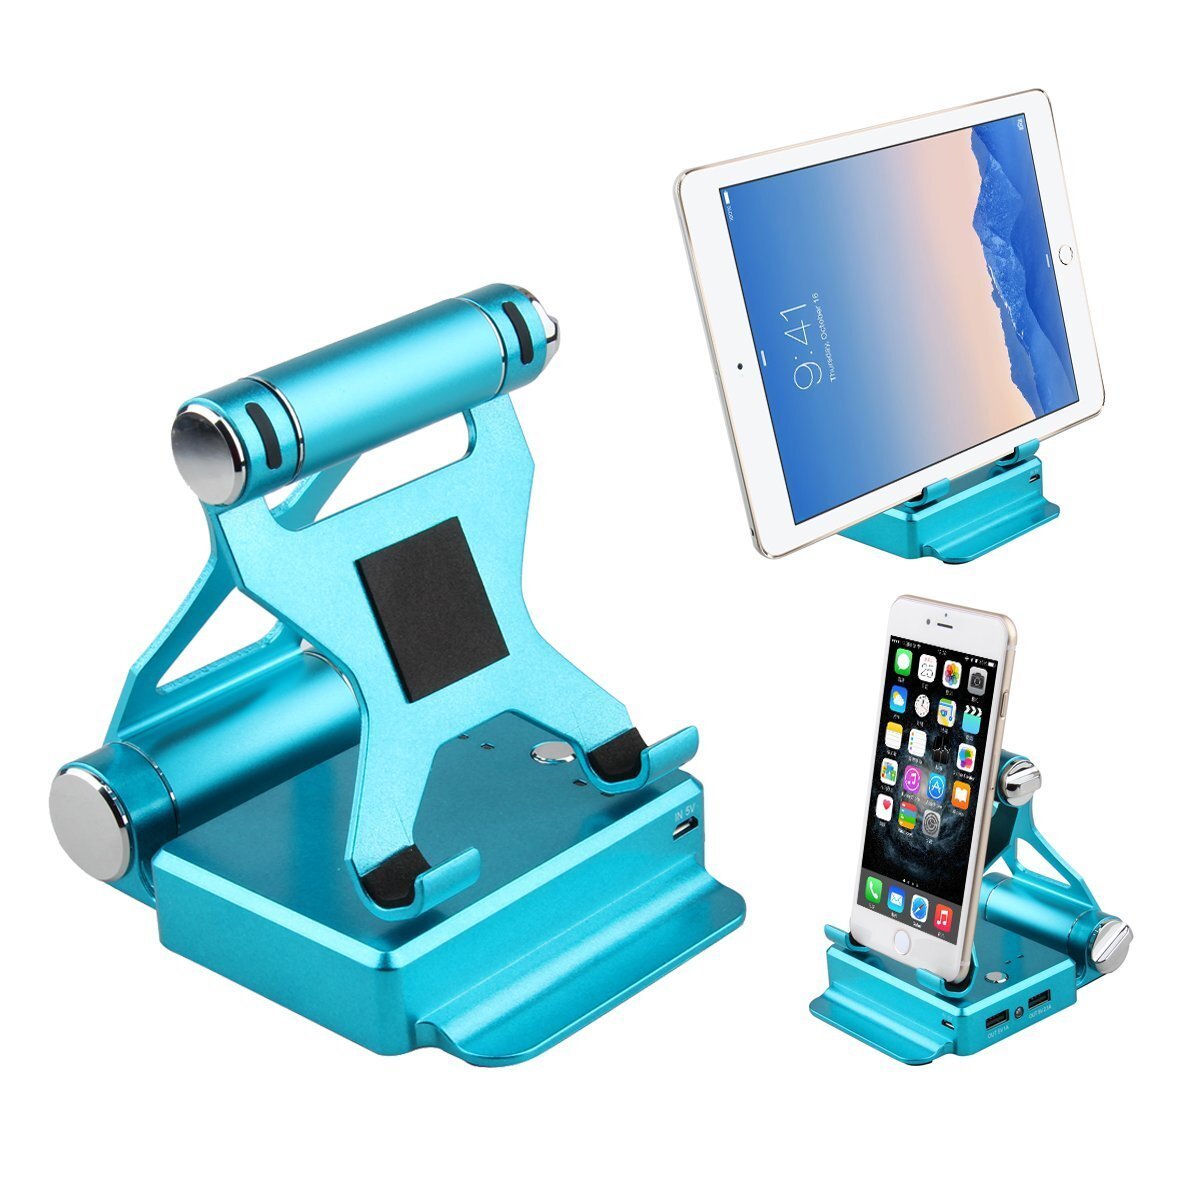 Color: Blue - Podium Style Stand With Extended Battery Up To 200% For iPad, iPhone And Other Smart Gadgets